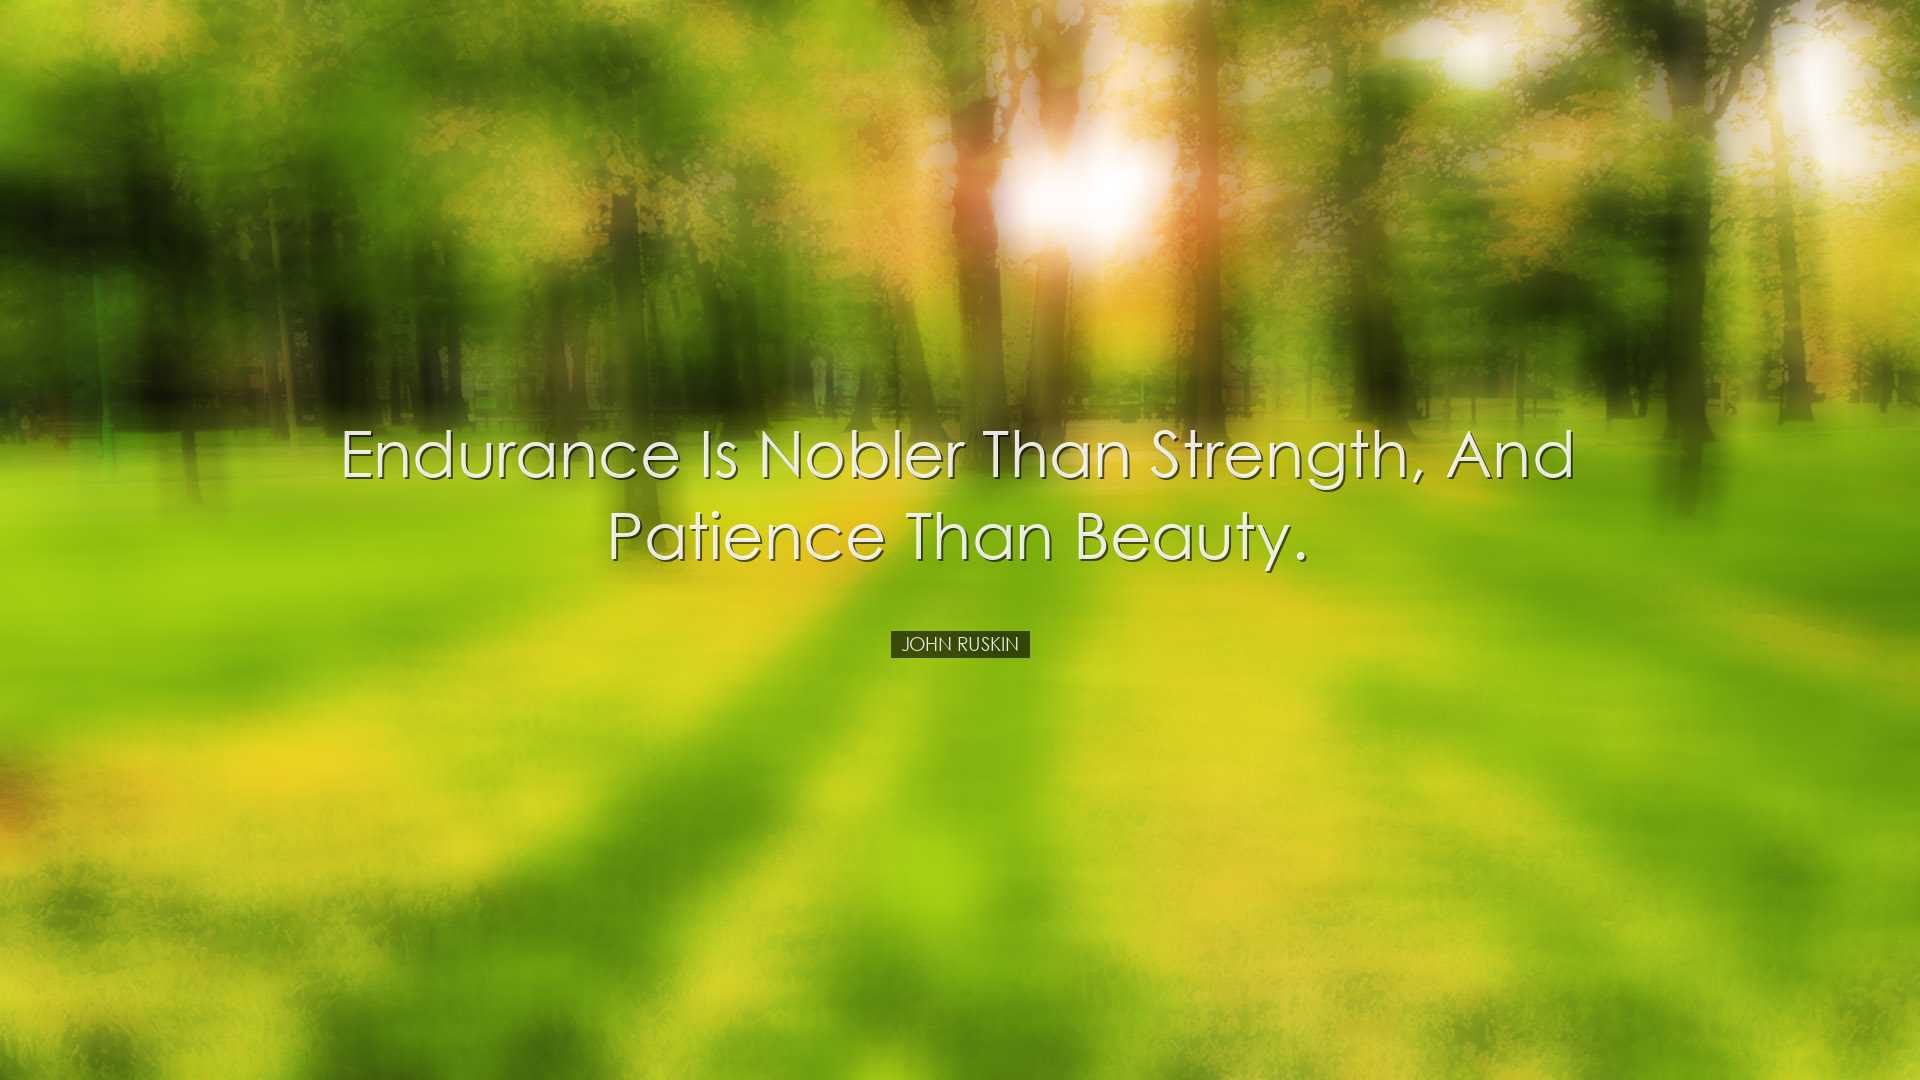 Endurance is nobler than strength, and patience than beauty. - Joh